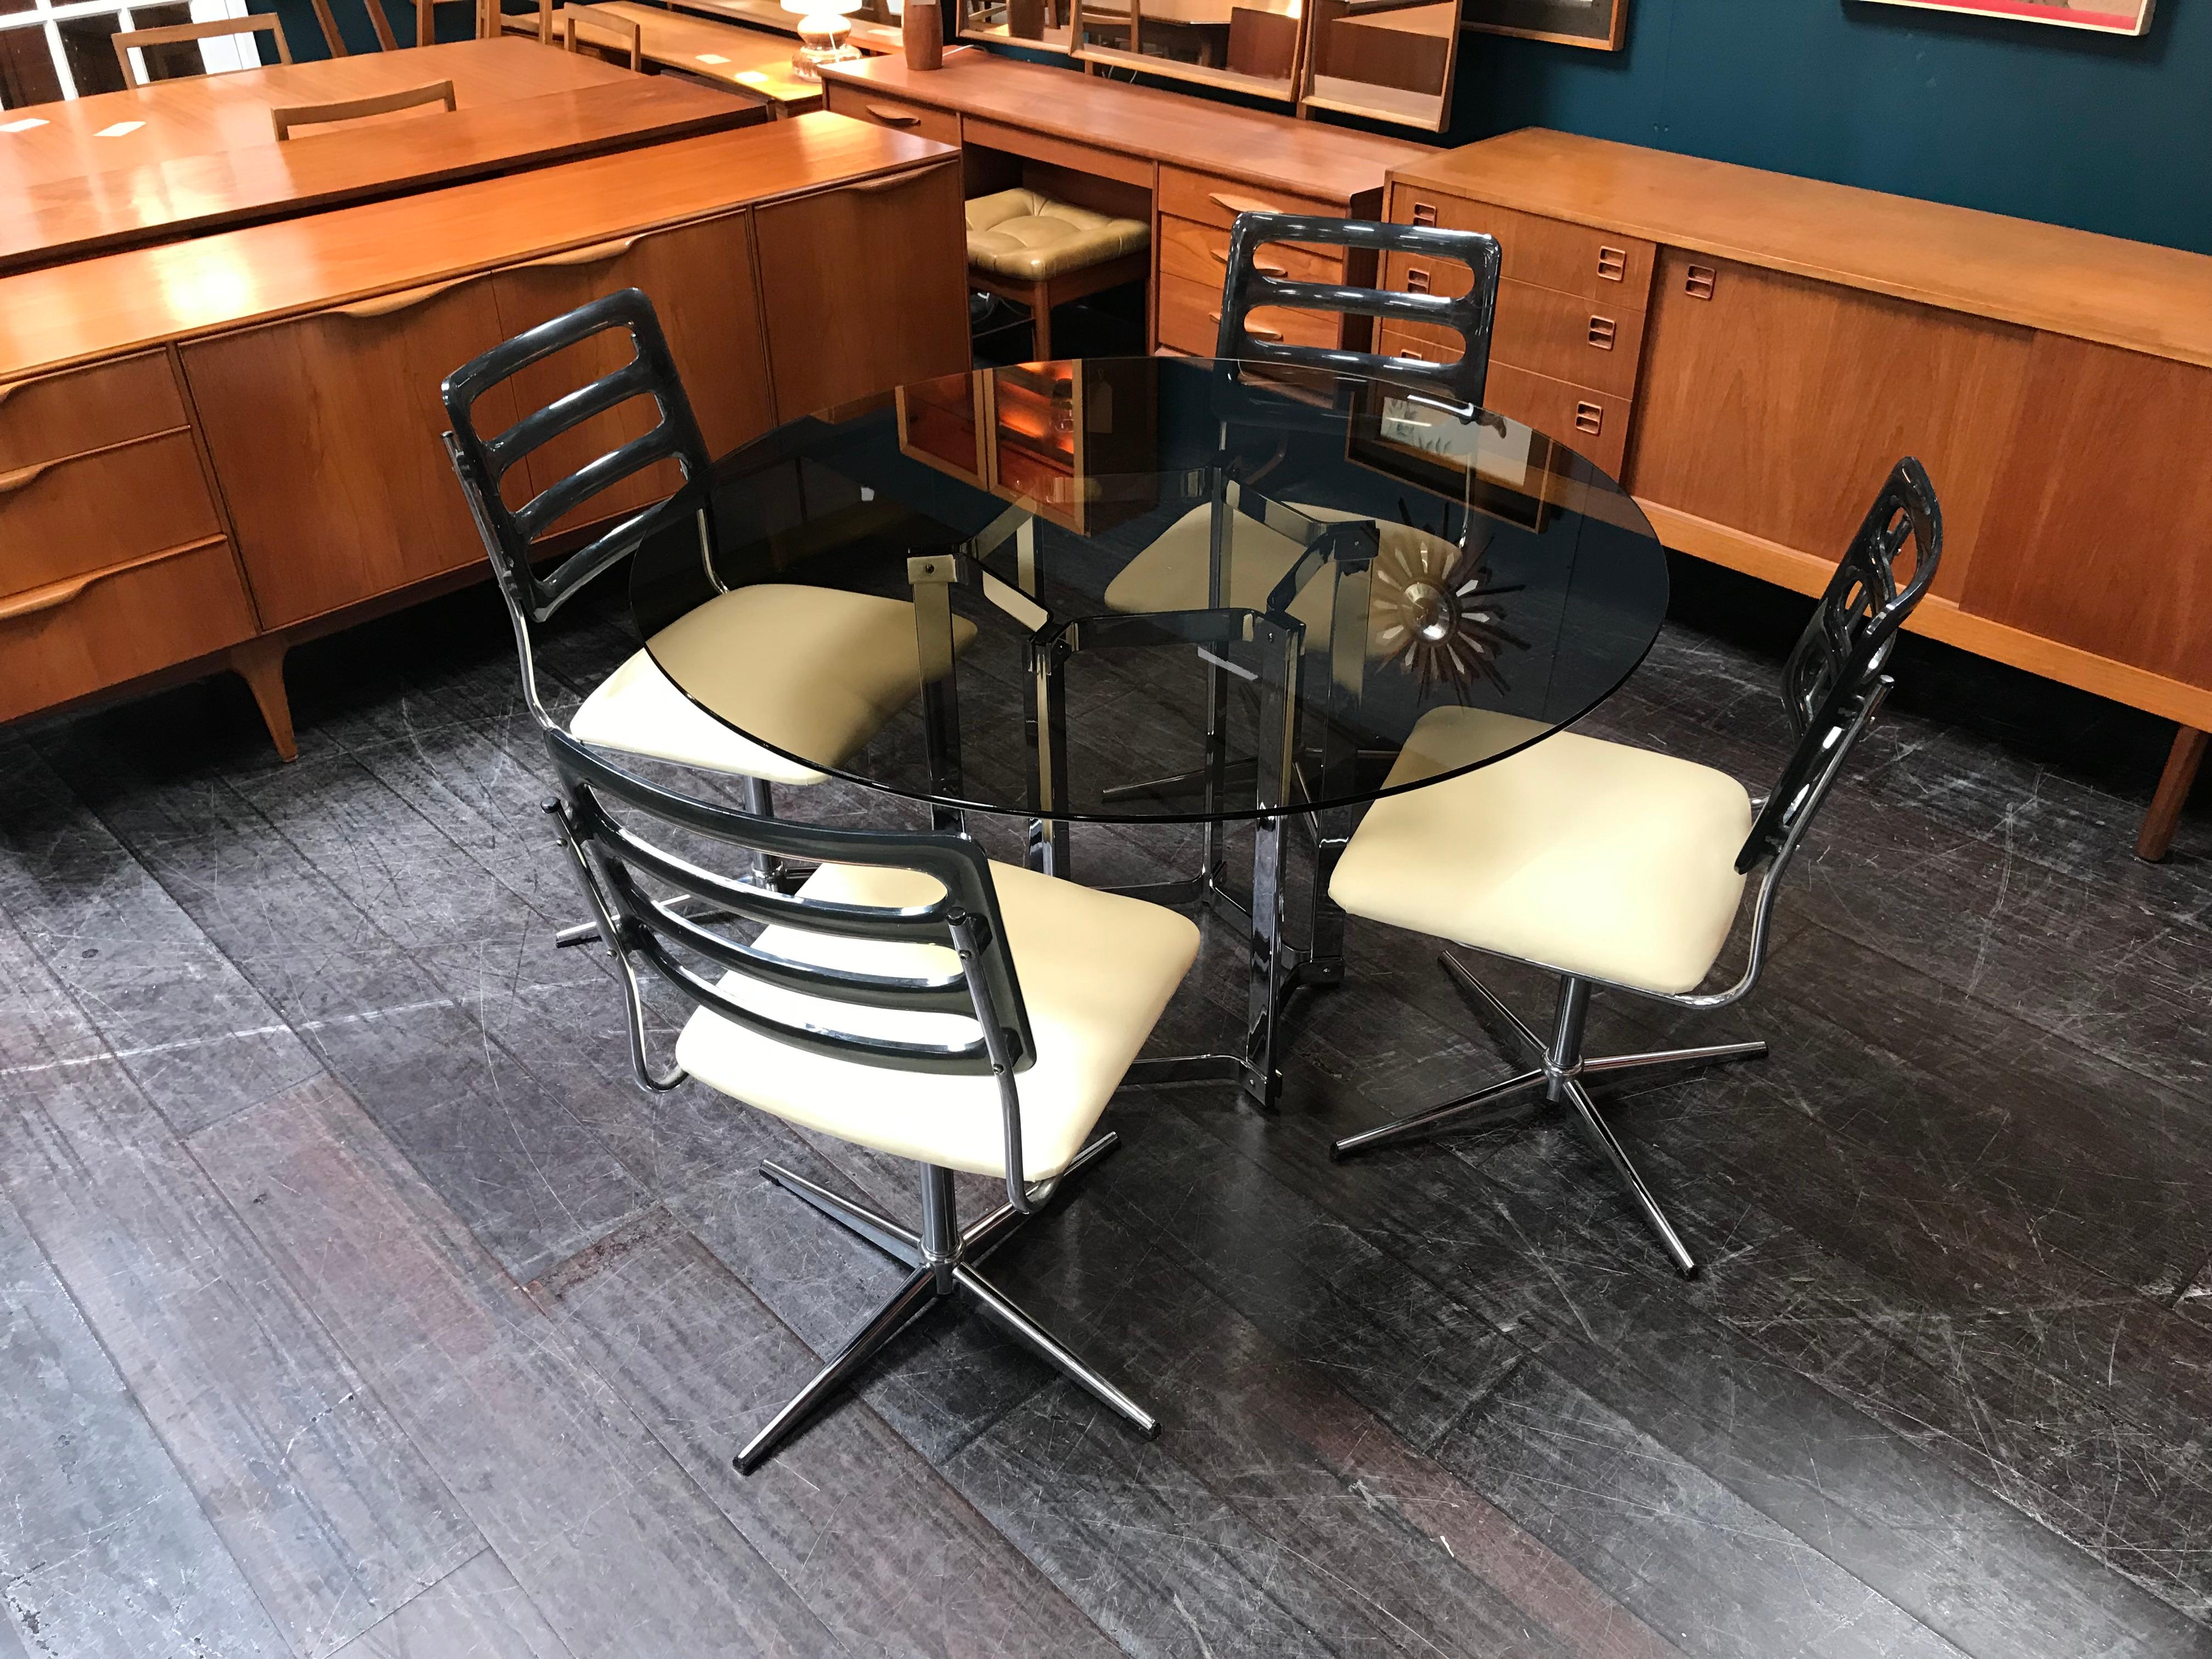 This Merrow Associates circular glass table with chrome base comes with 4 chairs with star bases and vinyl seat pads. The table was designed for Merrow, circa 1971, by Merrow’s founder, Richard Young. A former Royal College of Art student, he later